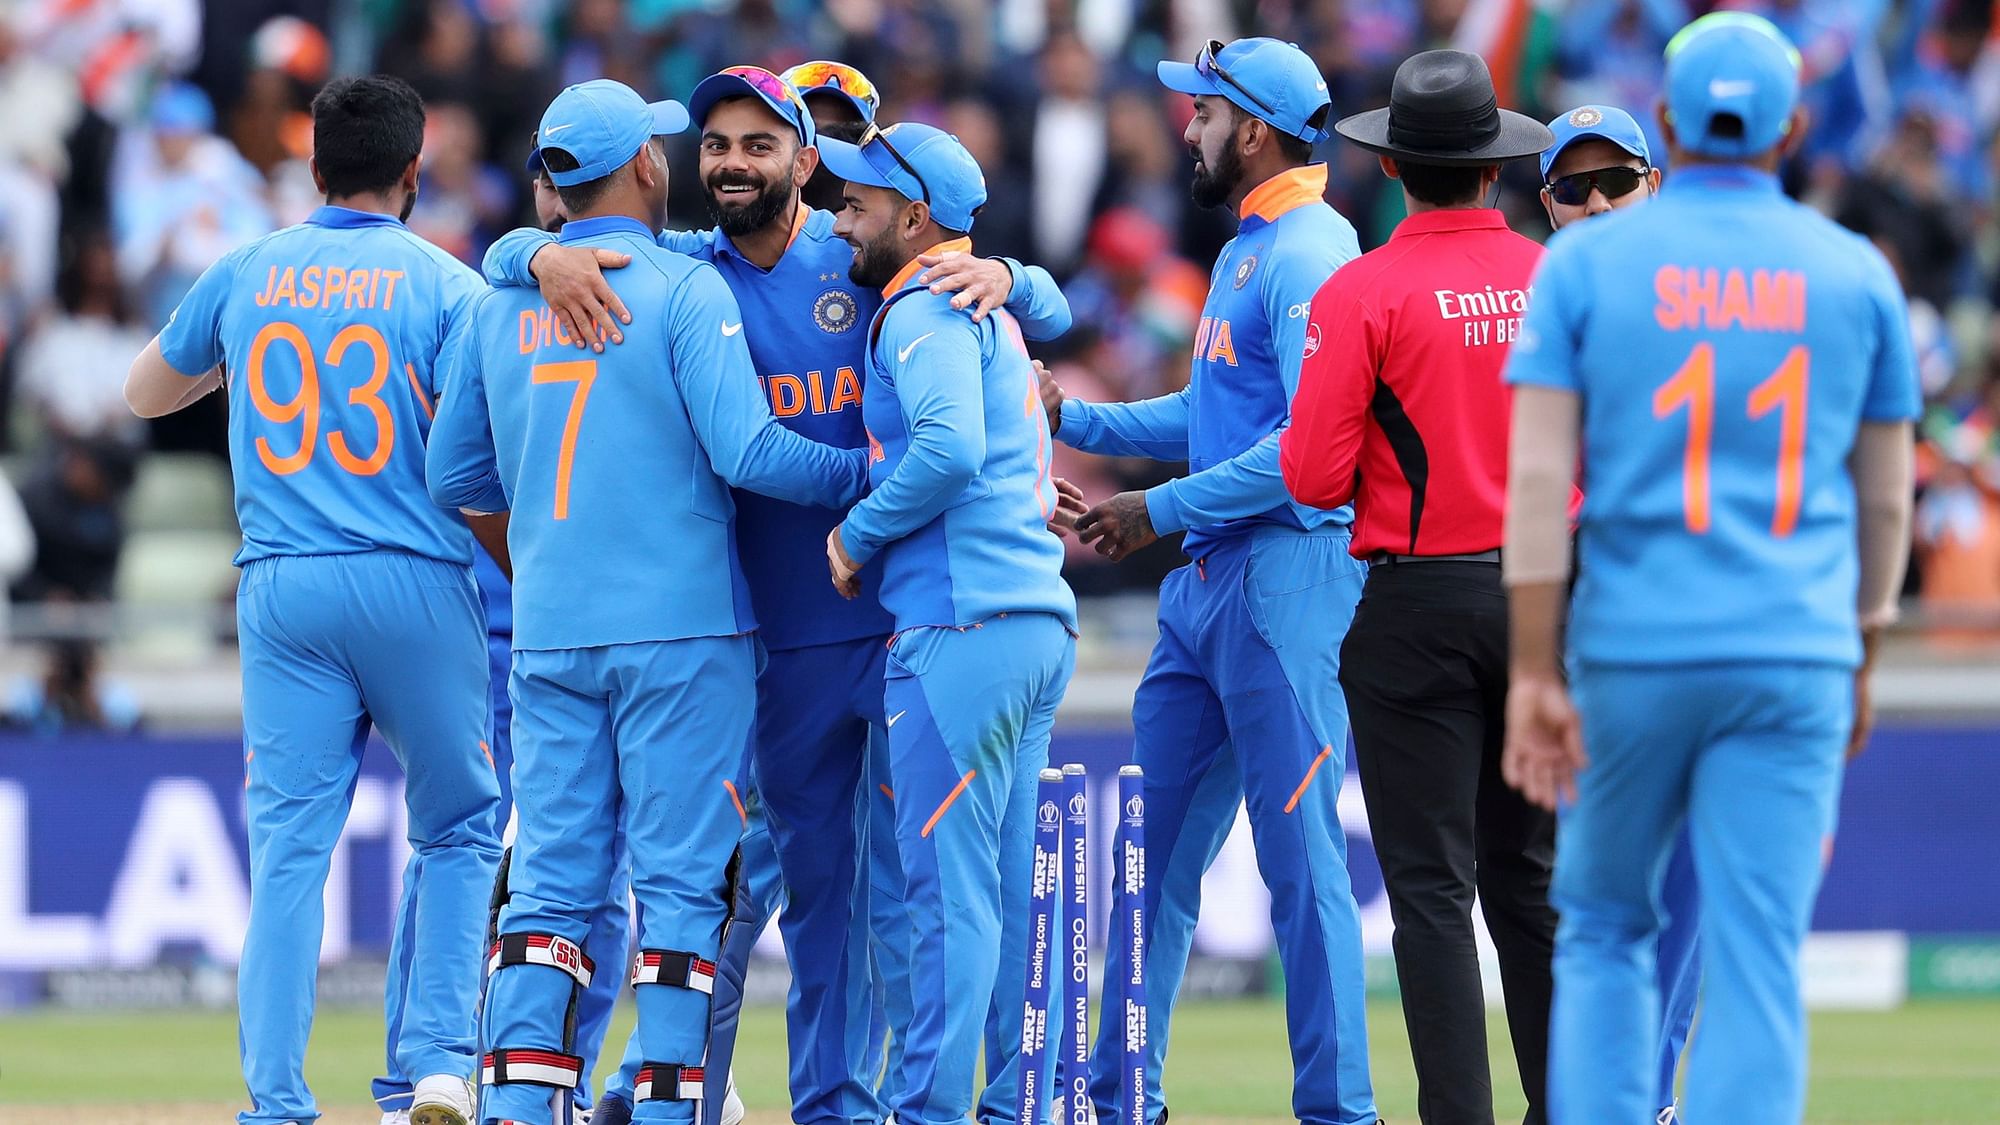 ICC World Cup 2019 Semi-Final Schedule, Timings and Venue: India will play New Zealand in the first semi-final on Tuesday, 9 July in Manchester.